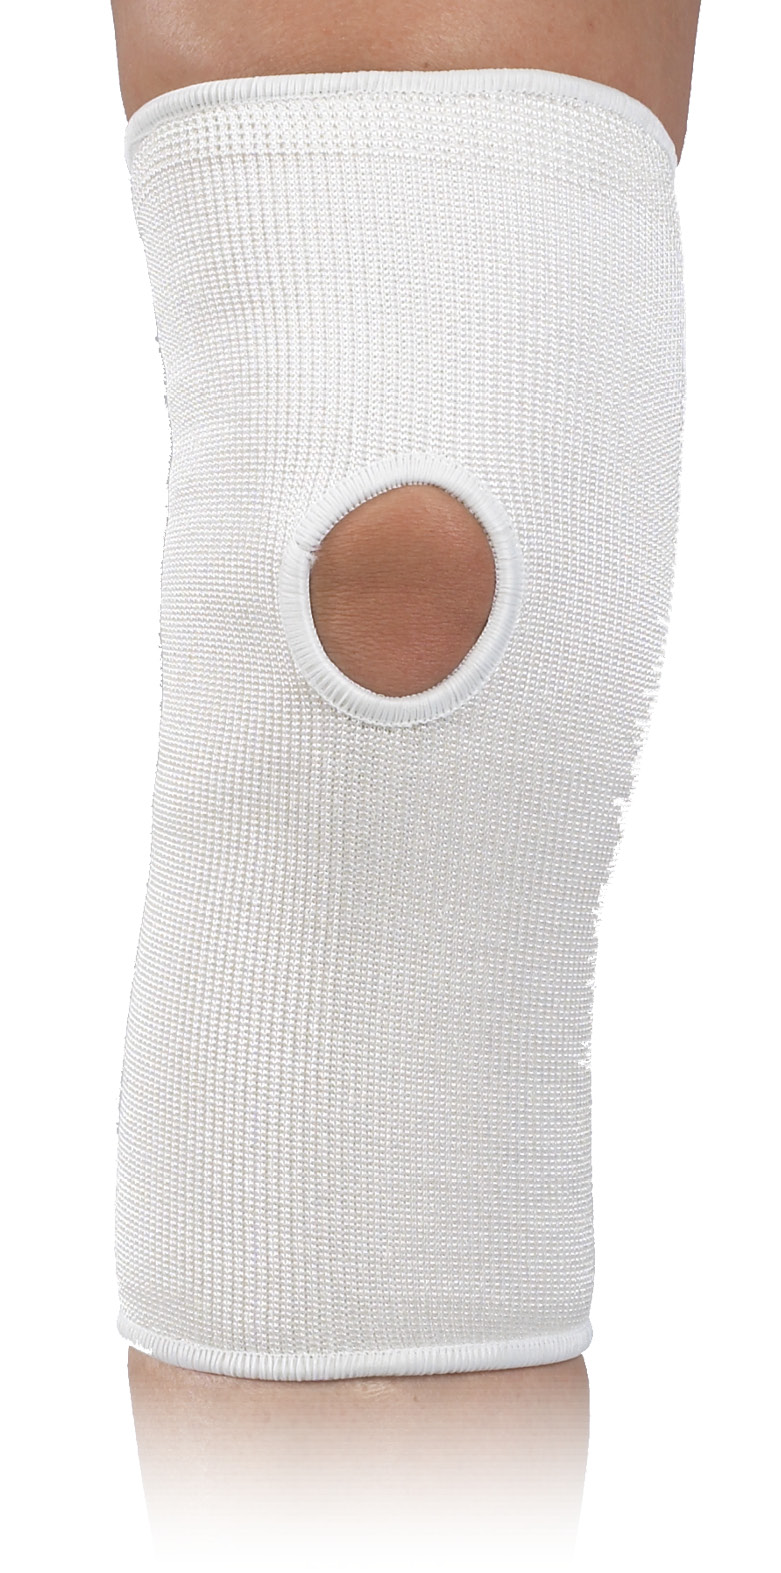 11 In. Slipon Knee Support Open Patella, Extra Large